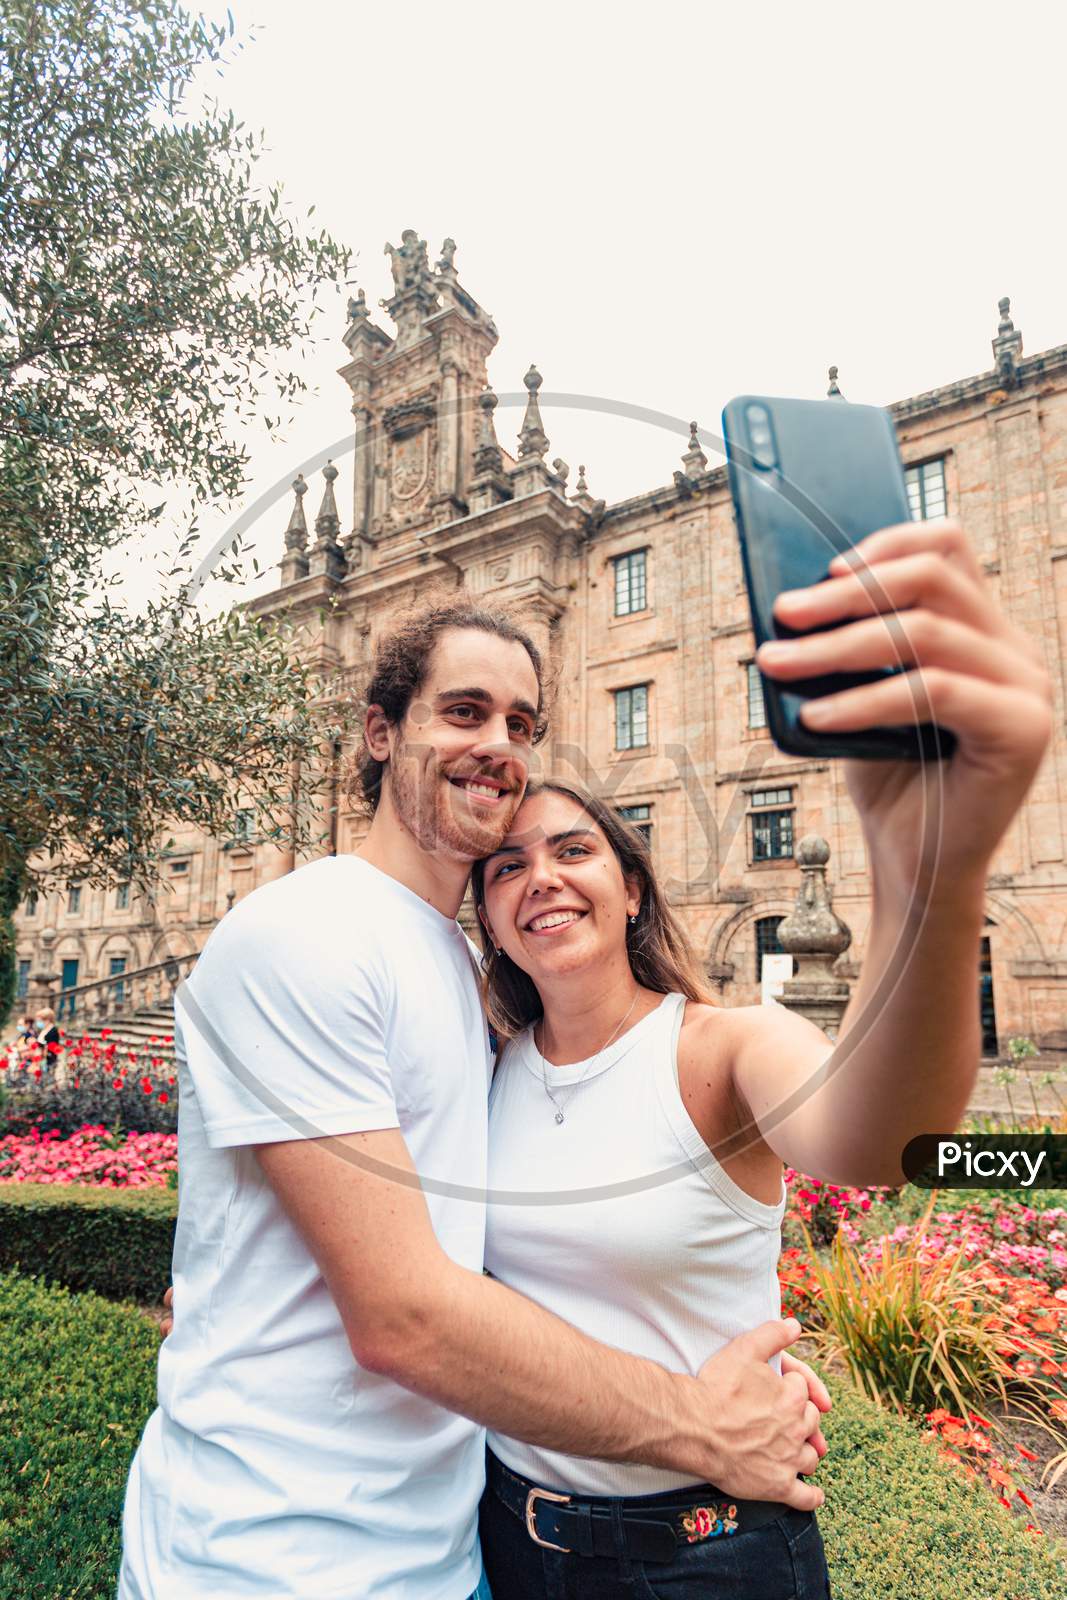 Vertical Shot Of A Young Couple Taking A Fancy Selfie In A Garden In Front Of An Old Building